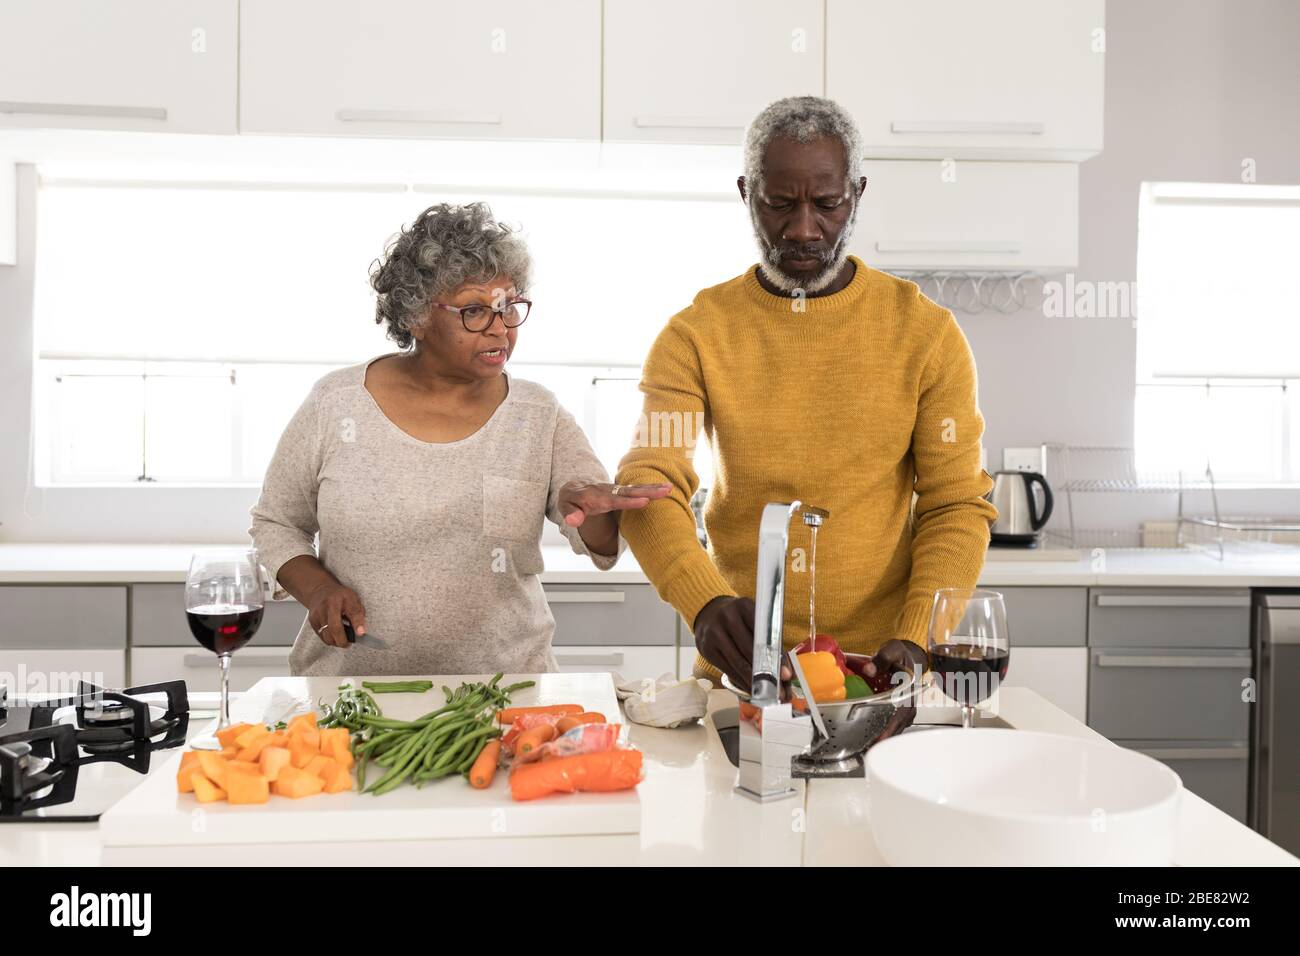 A senior African American couple spending time together at home and cooking Stock Photo